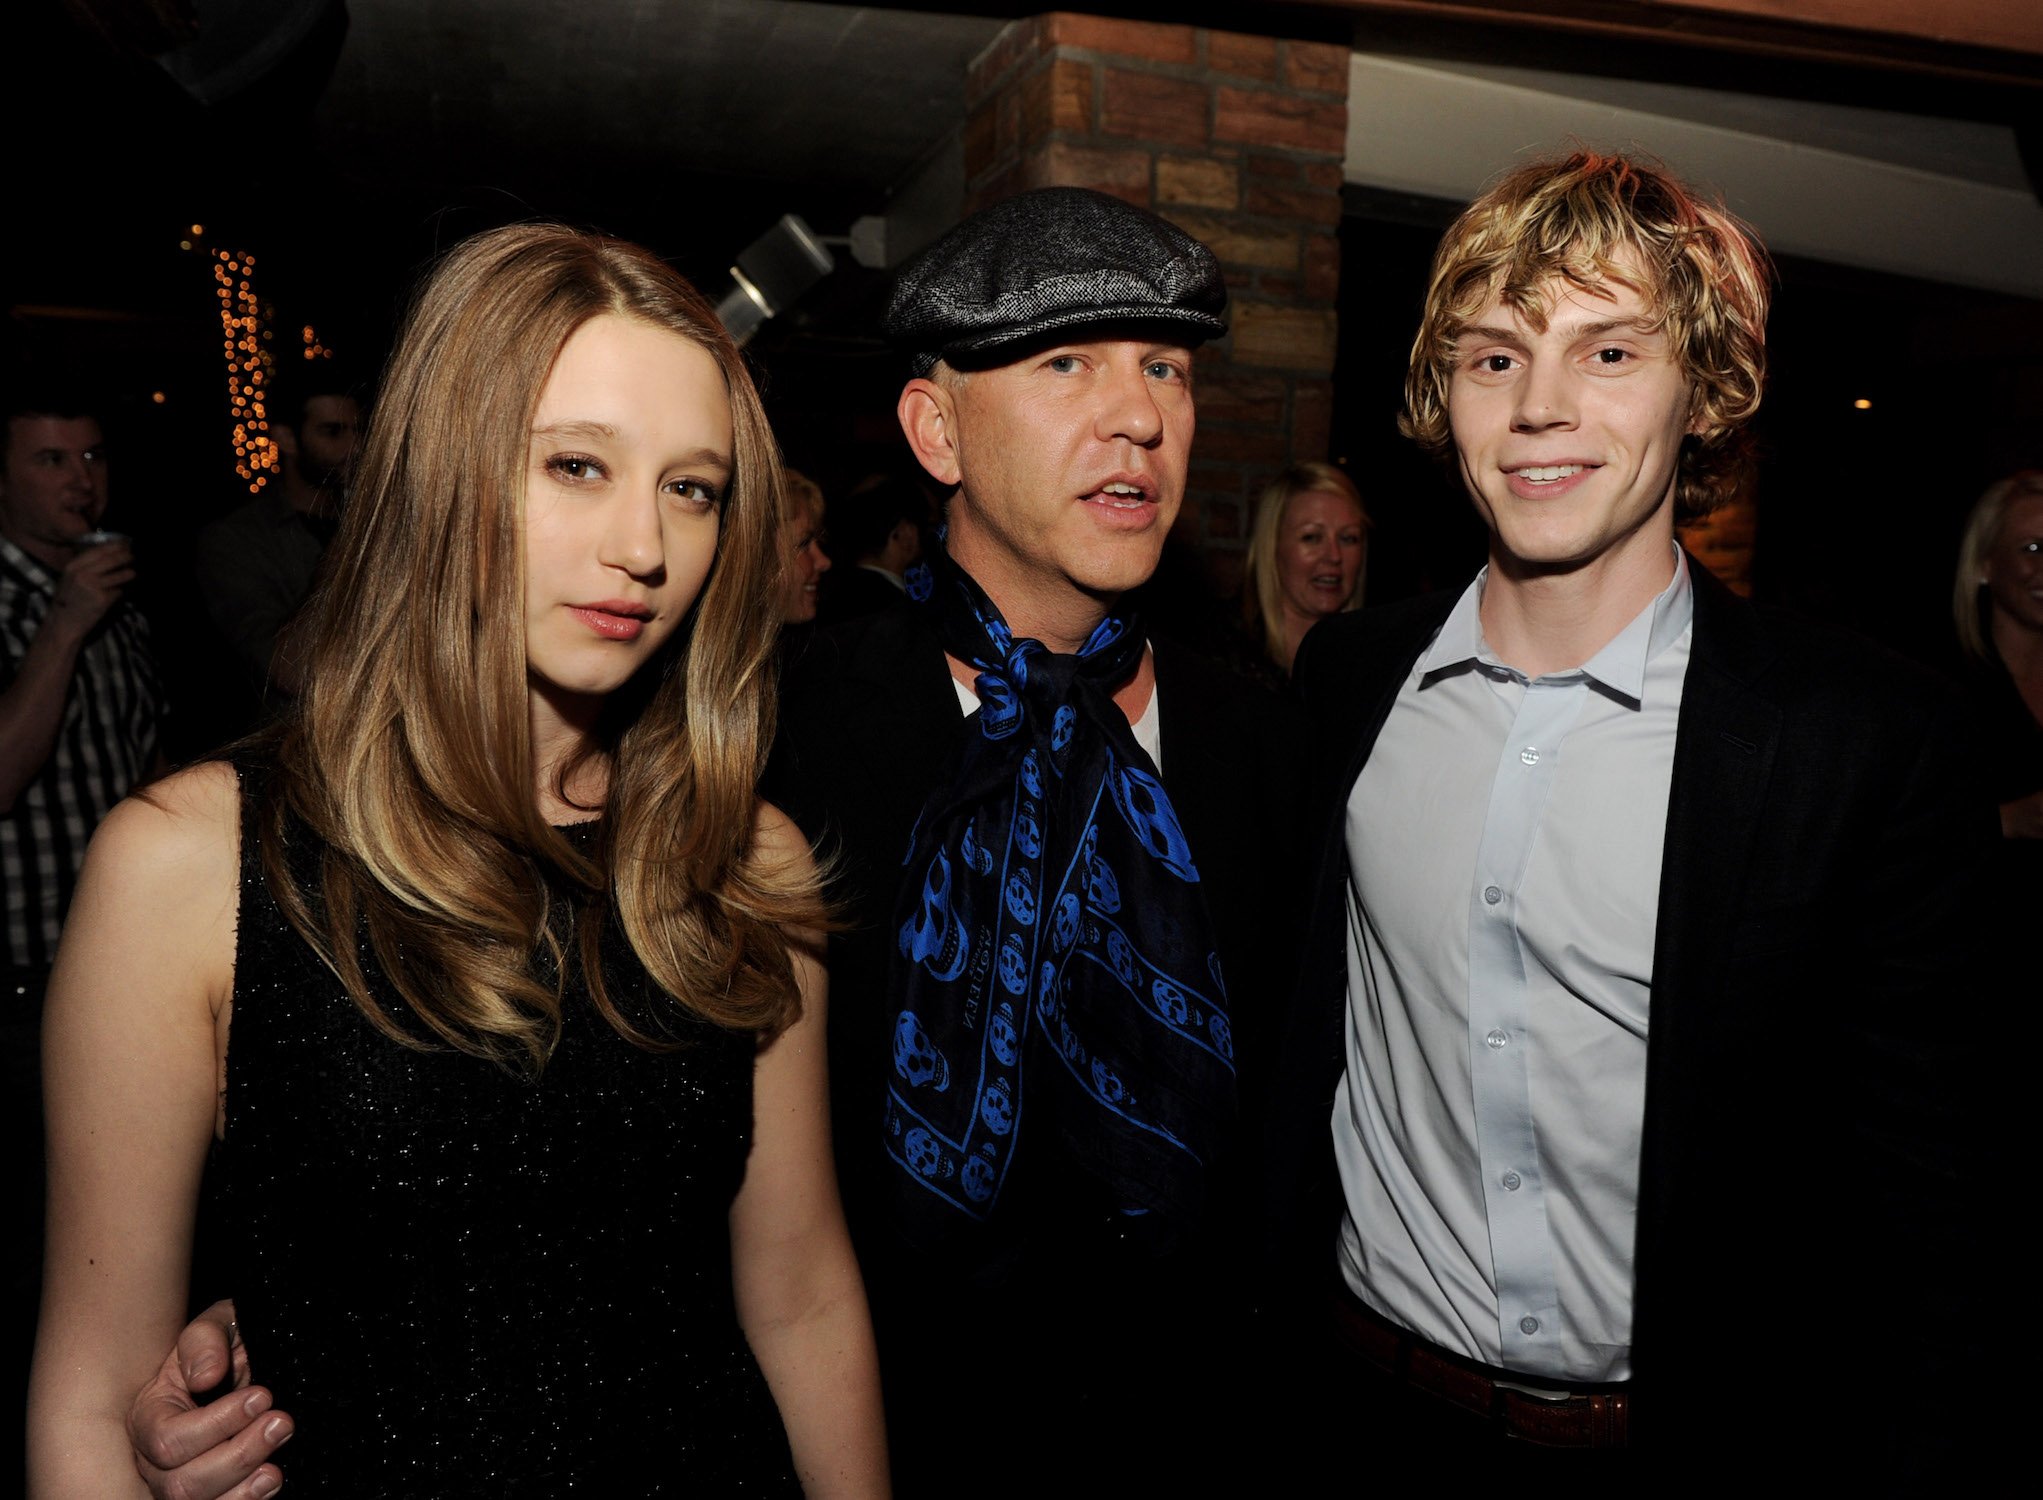 Taissa Farmiga, producer/creator Ryan Murphy, and actor Evan Peters at the premiere of FX Network's "American Horror Story' in 2011. Ryan Murphy and Evan Peters are part of 'American Horror Story' Season 10